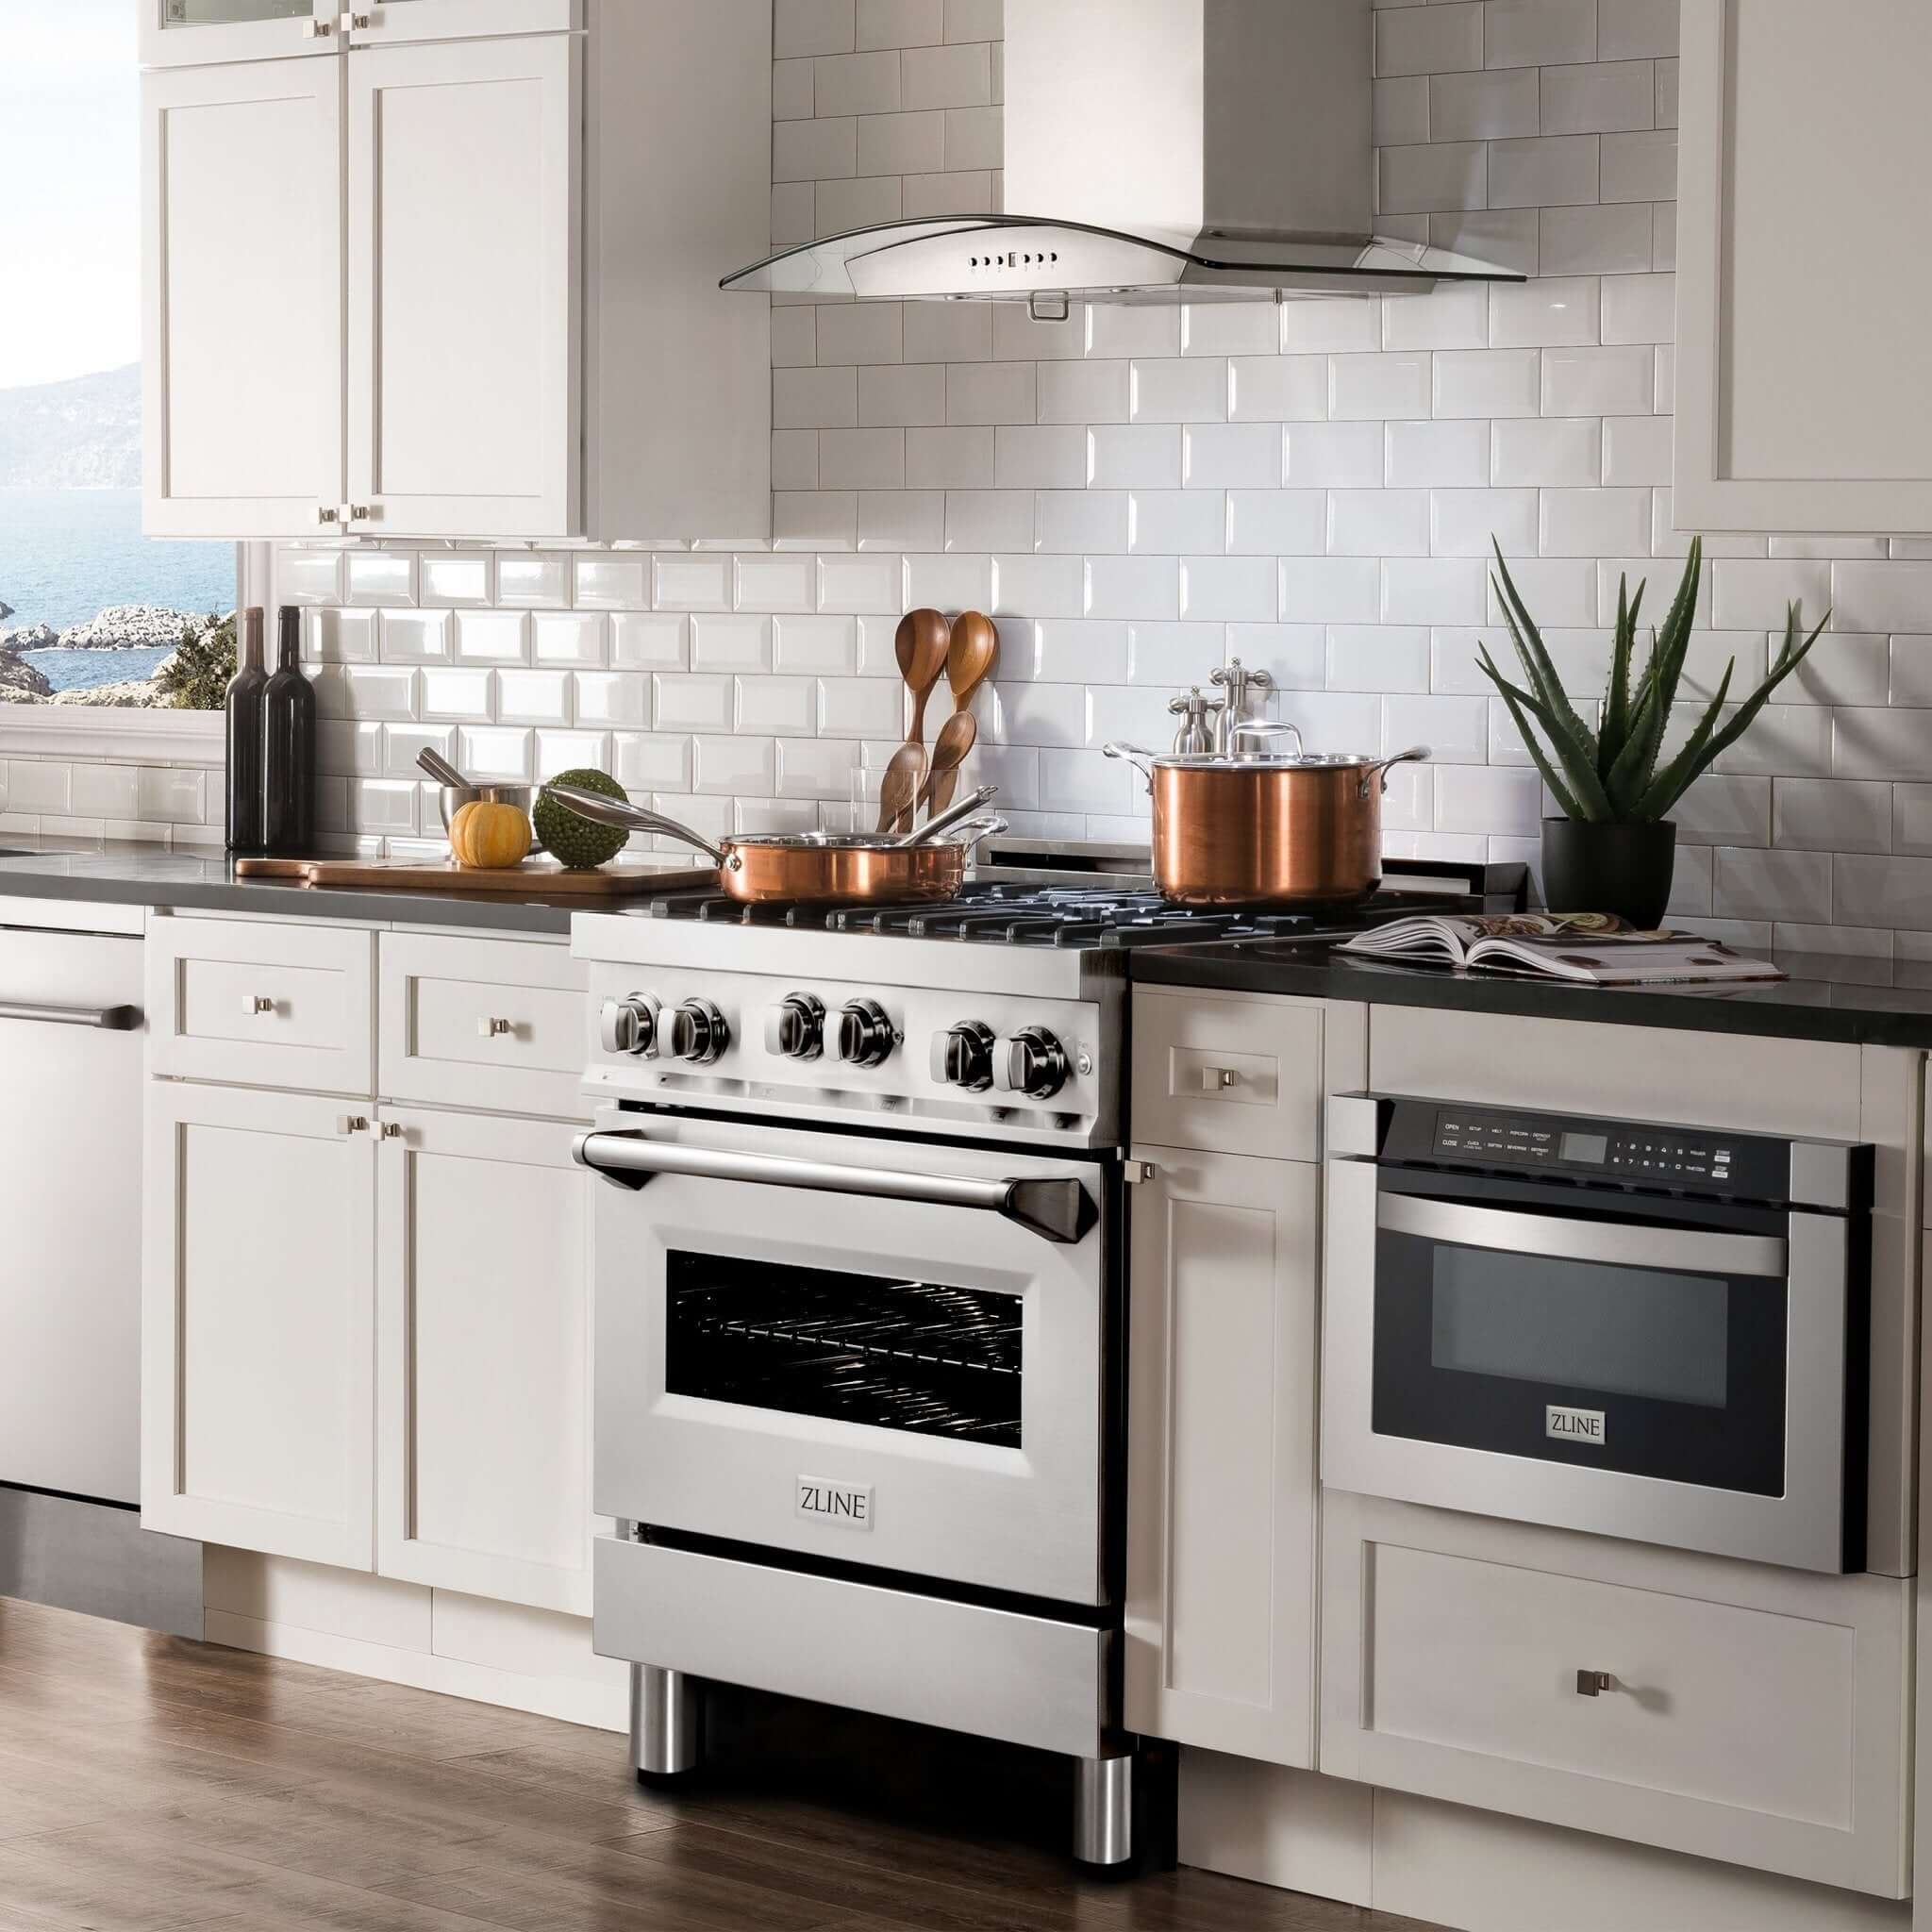 ZLINE 30" Professional Gas on Gas Range in Stainless Steel with Color Door Options - Rustic Kitchen & Bath - Ranges - ZLINE Kitchen and Bath